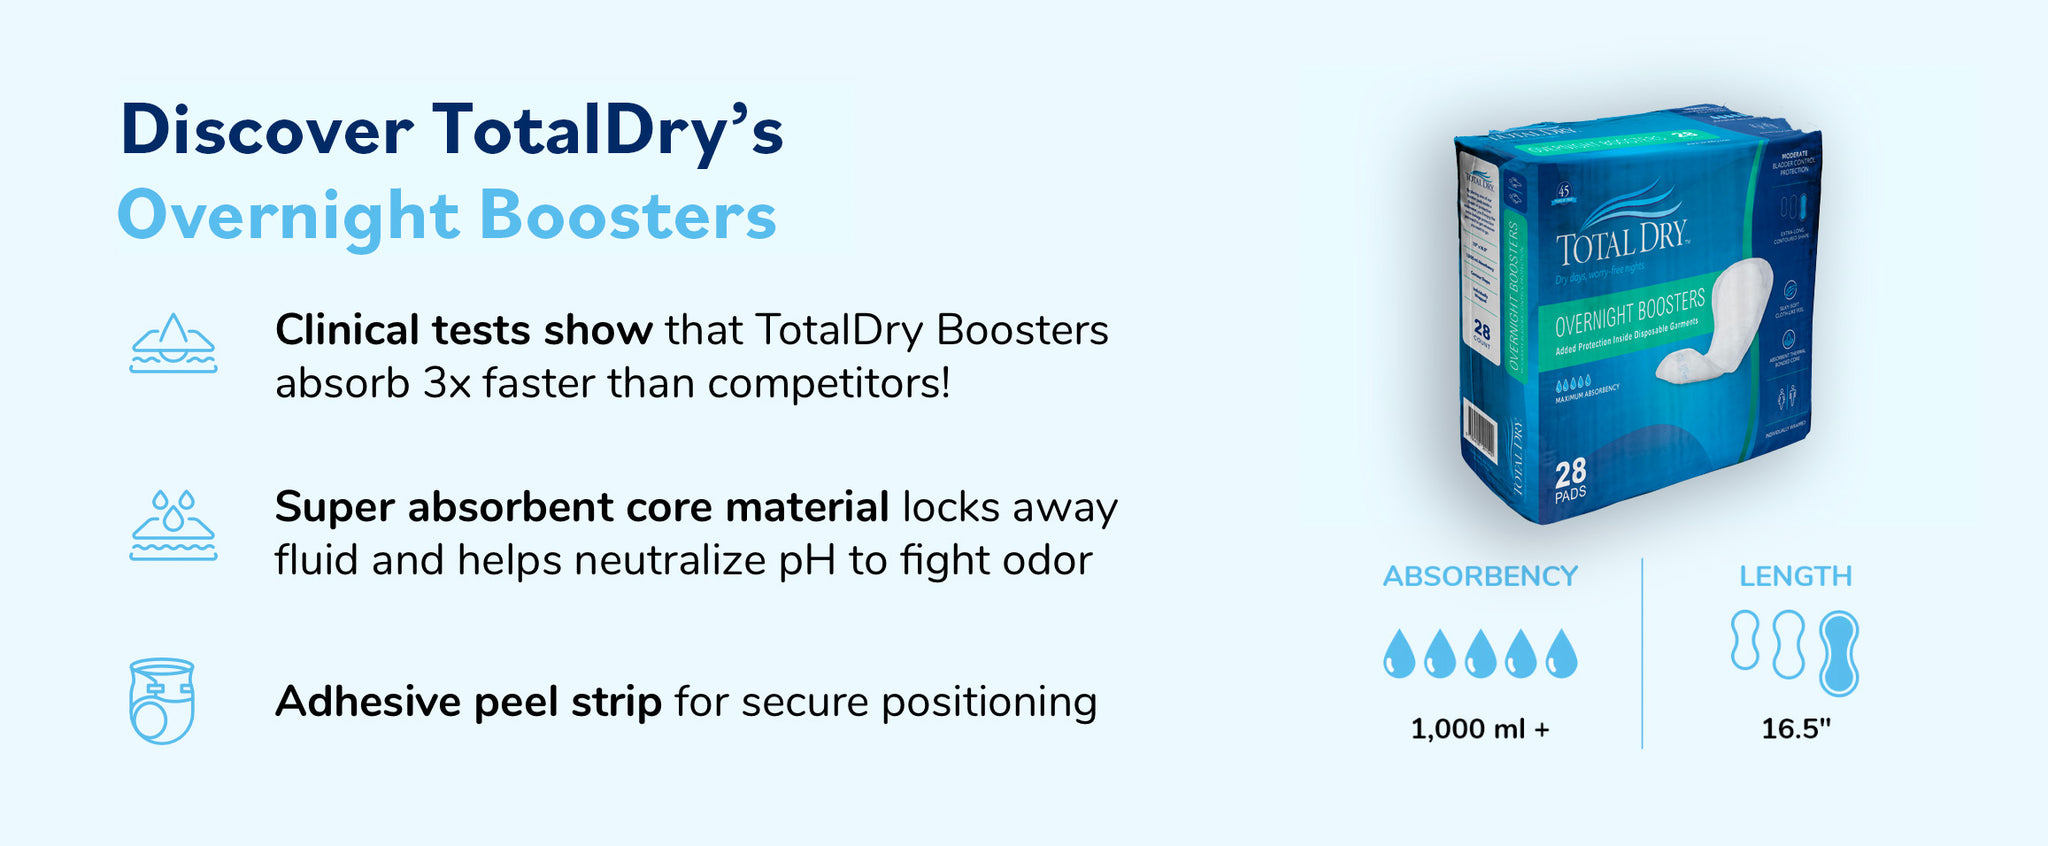 TotalDry Overnight Boosters